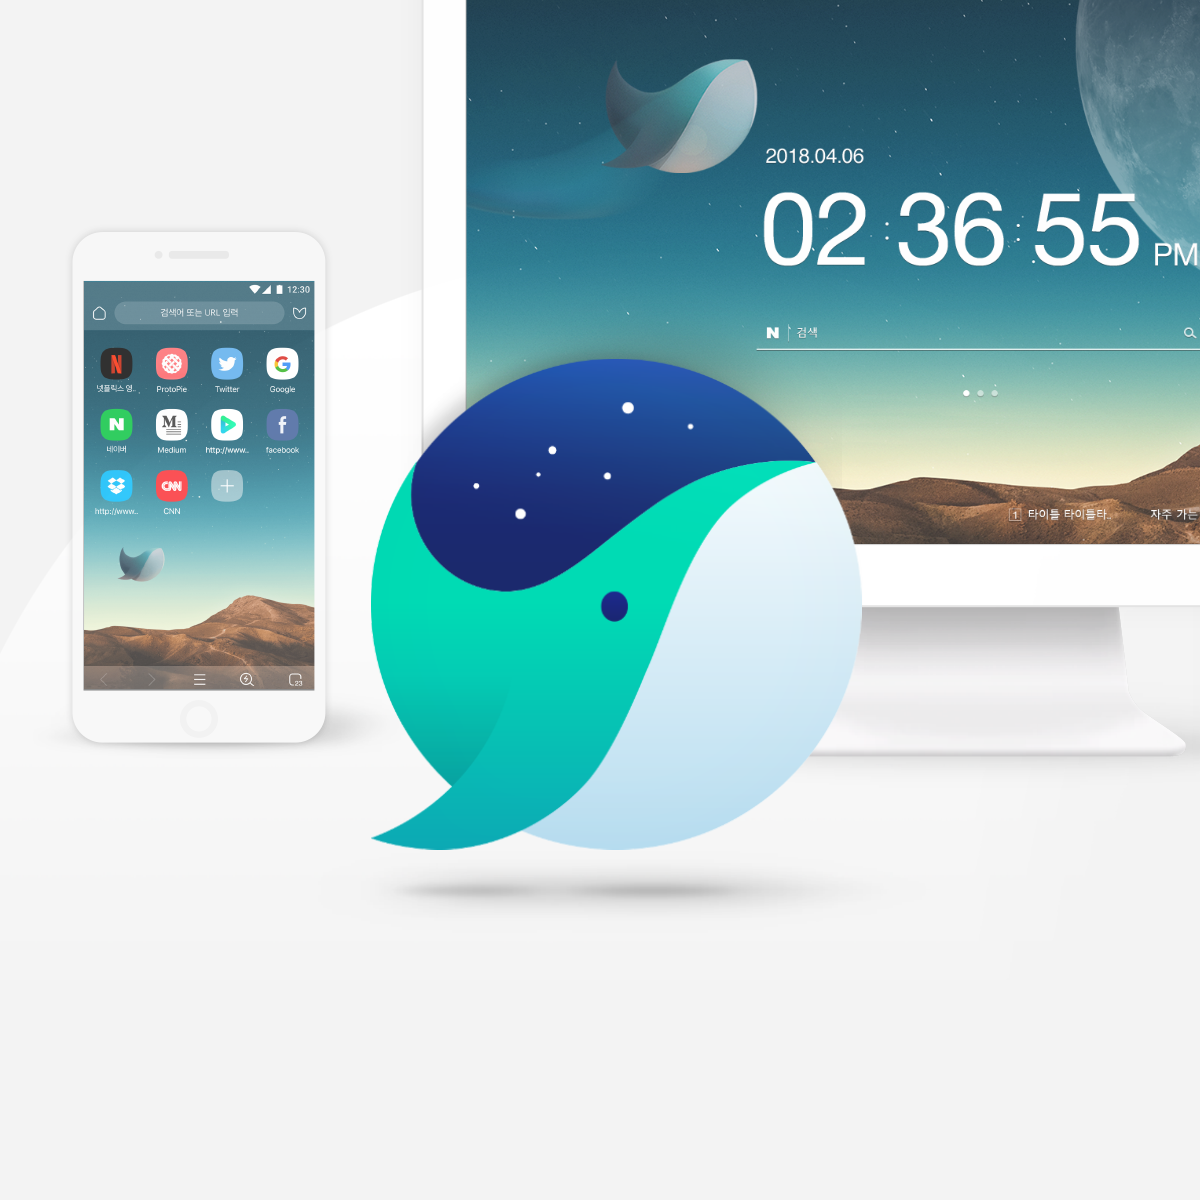 Whale Browser 3.21.192.18 for ios instal